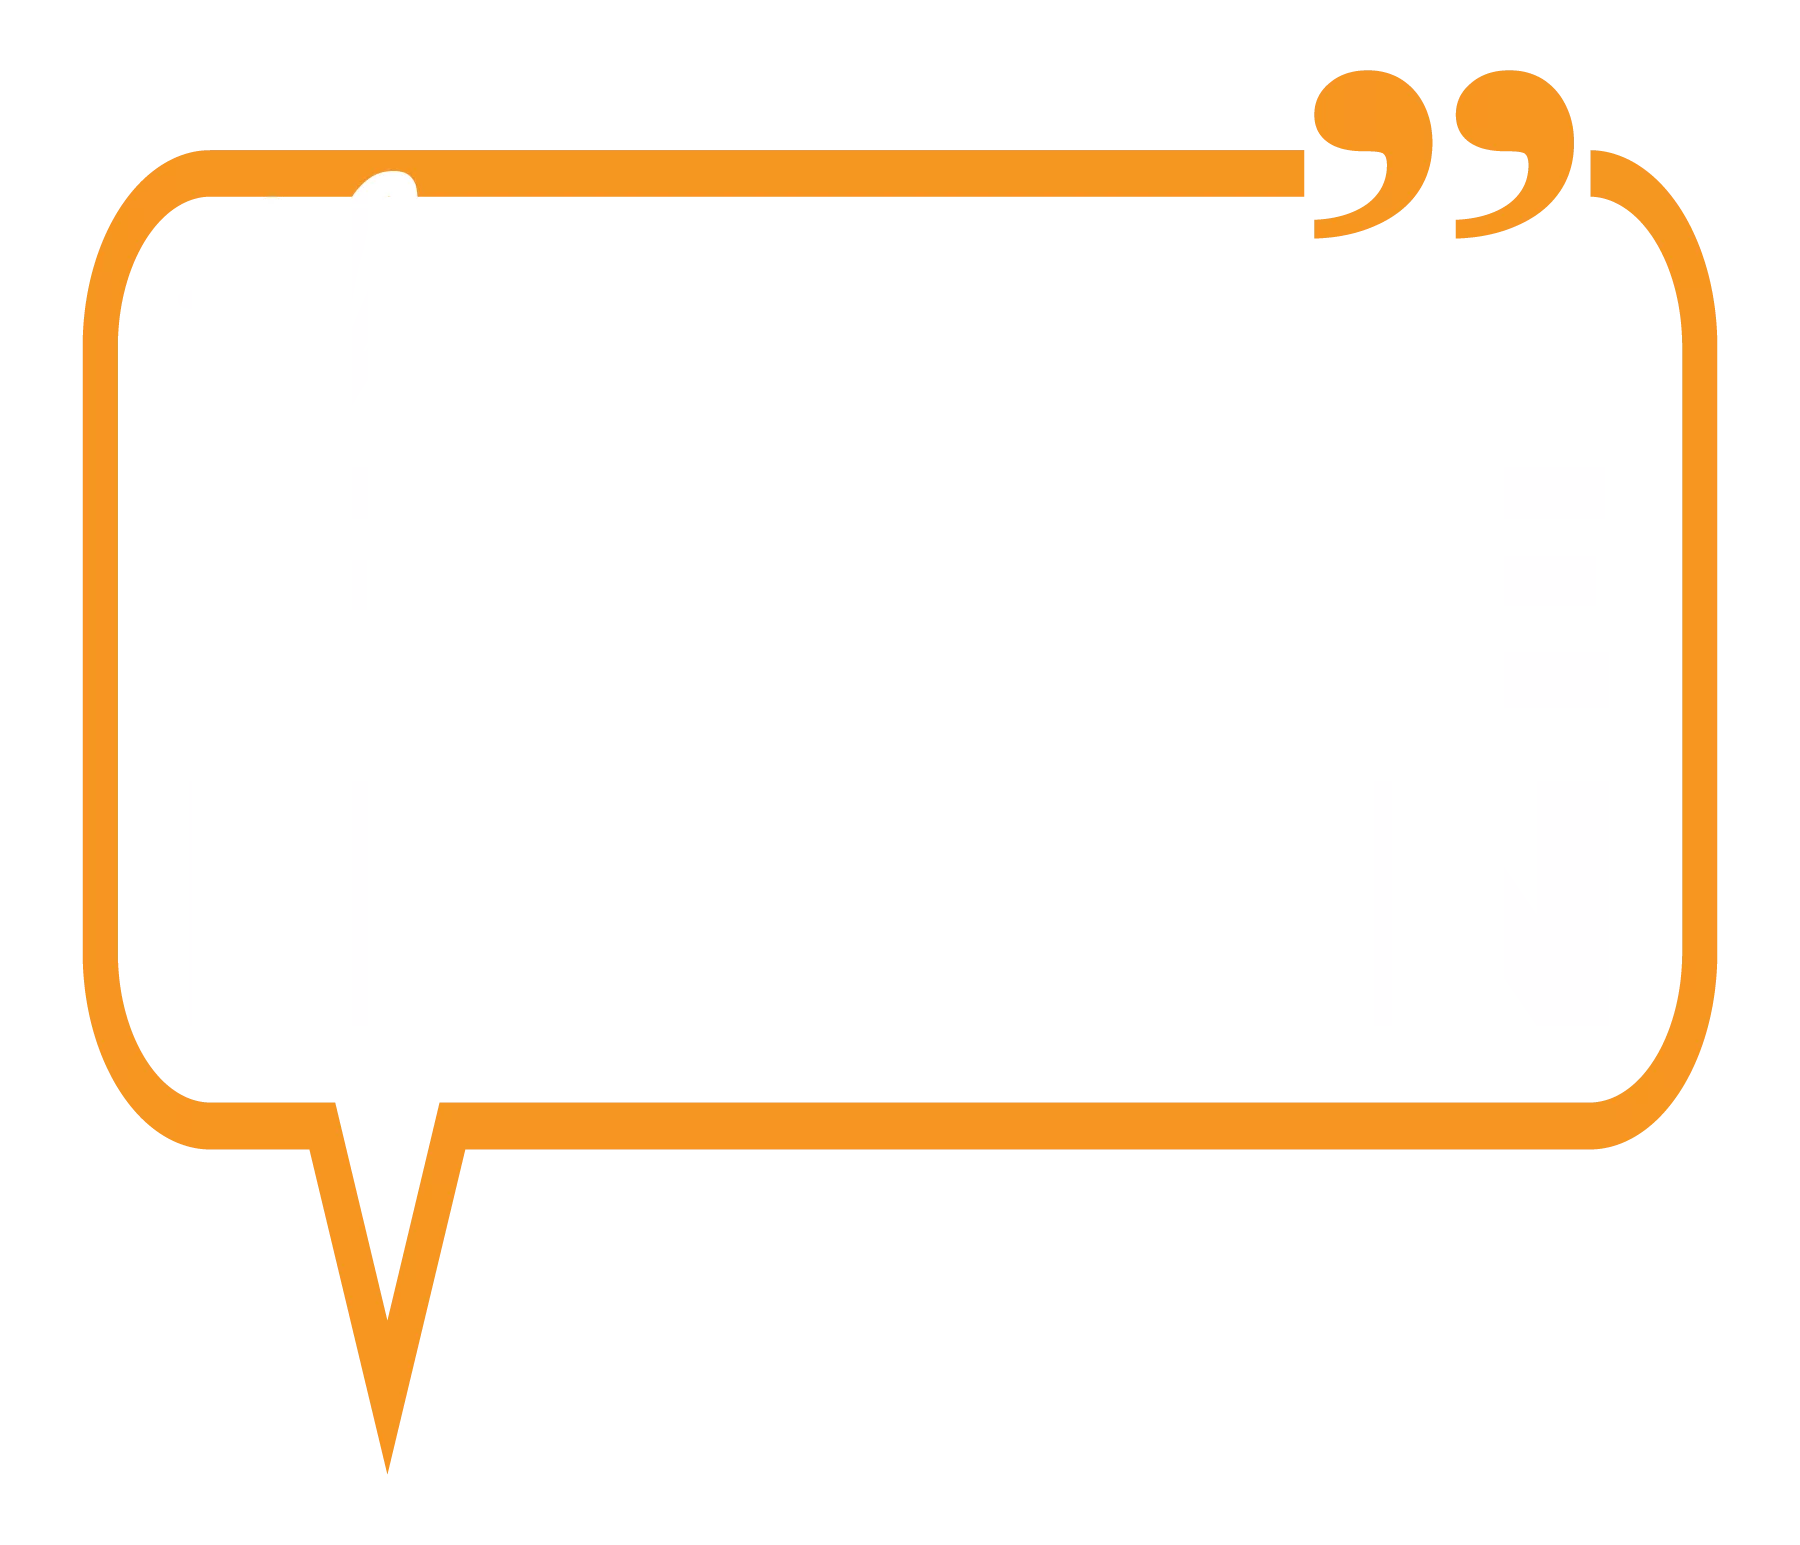 The Foodie Nation